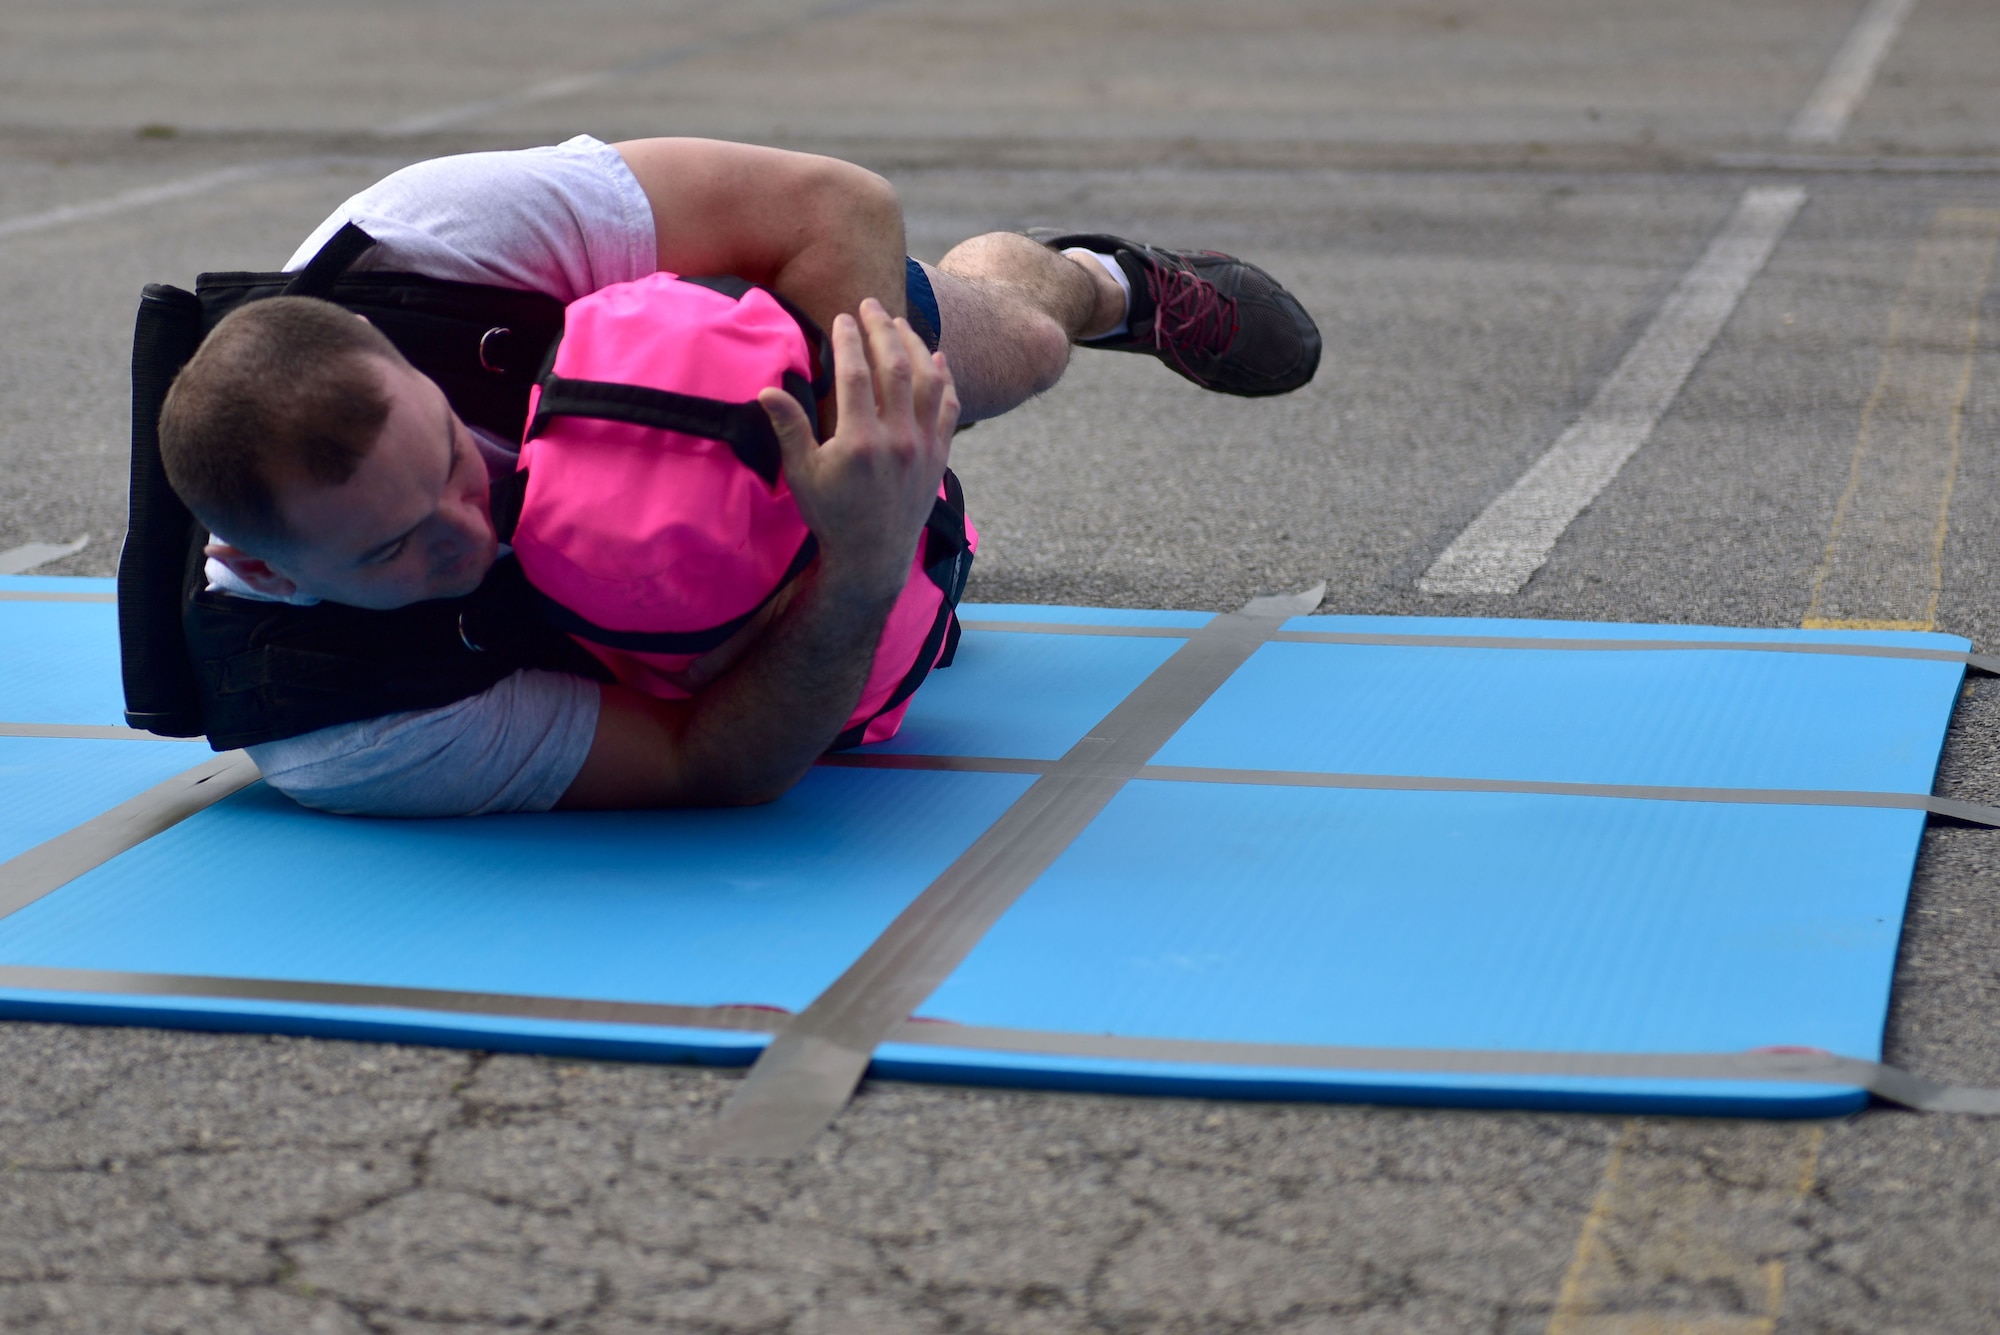 A man rolls with a pink sandbag and a weighted vest.